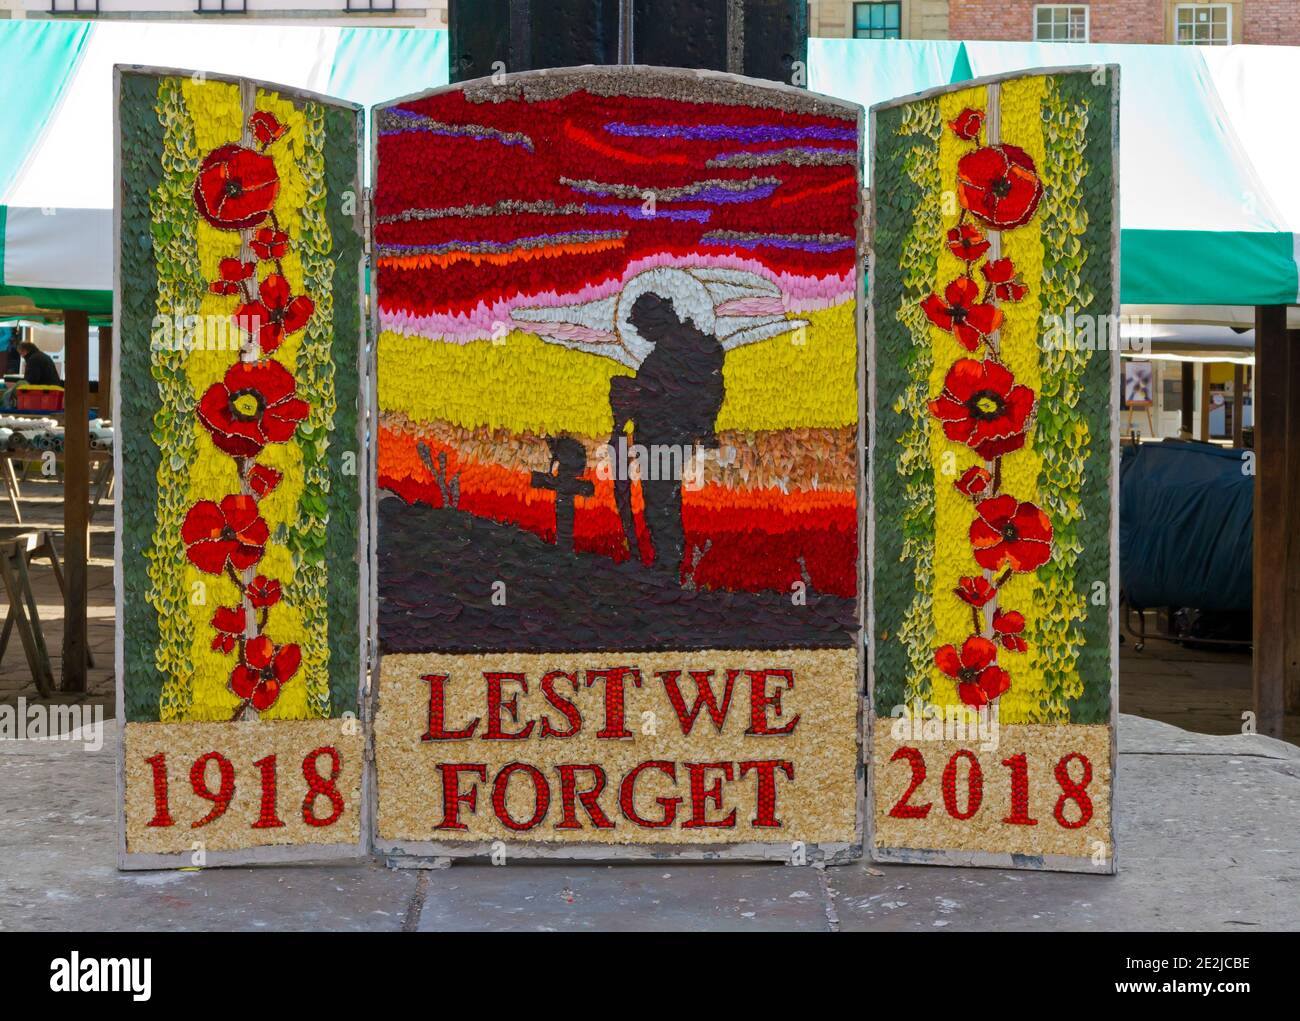 Well dressing in Chesterfield Market Derbyshire England UK to commemorate the 100th anniversary of the end of the First World War in 2018 Stock Photo